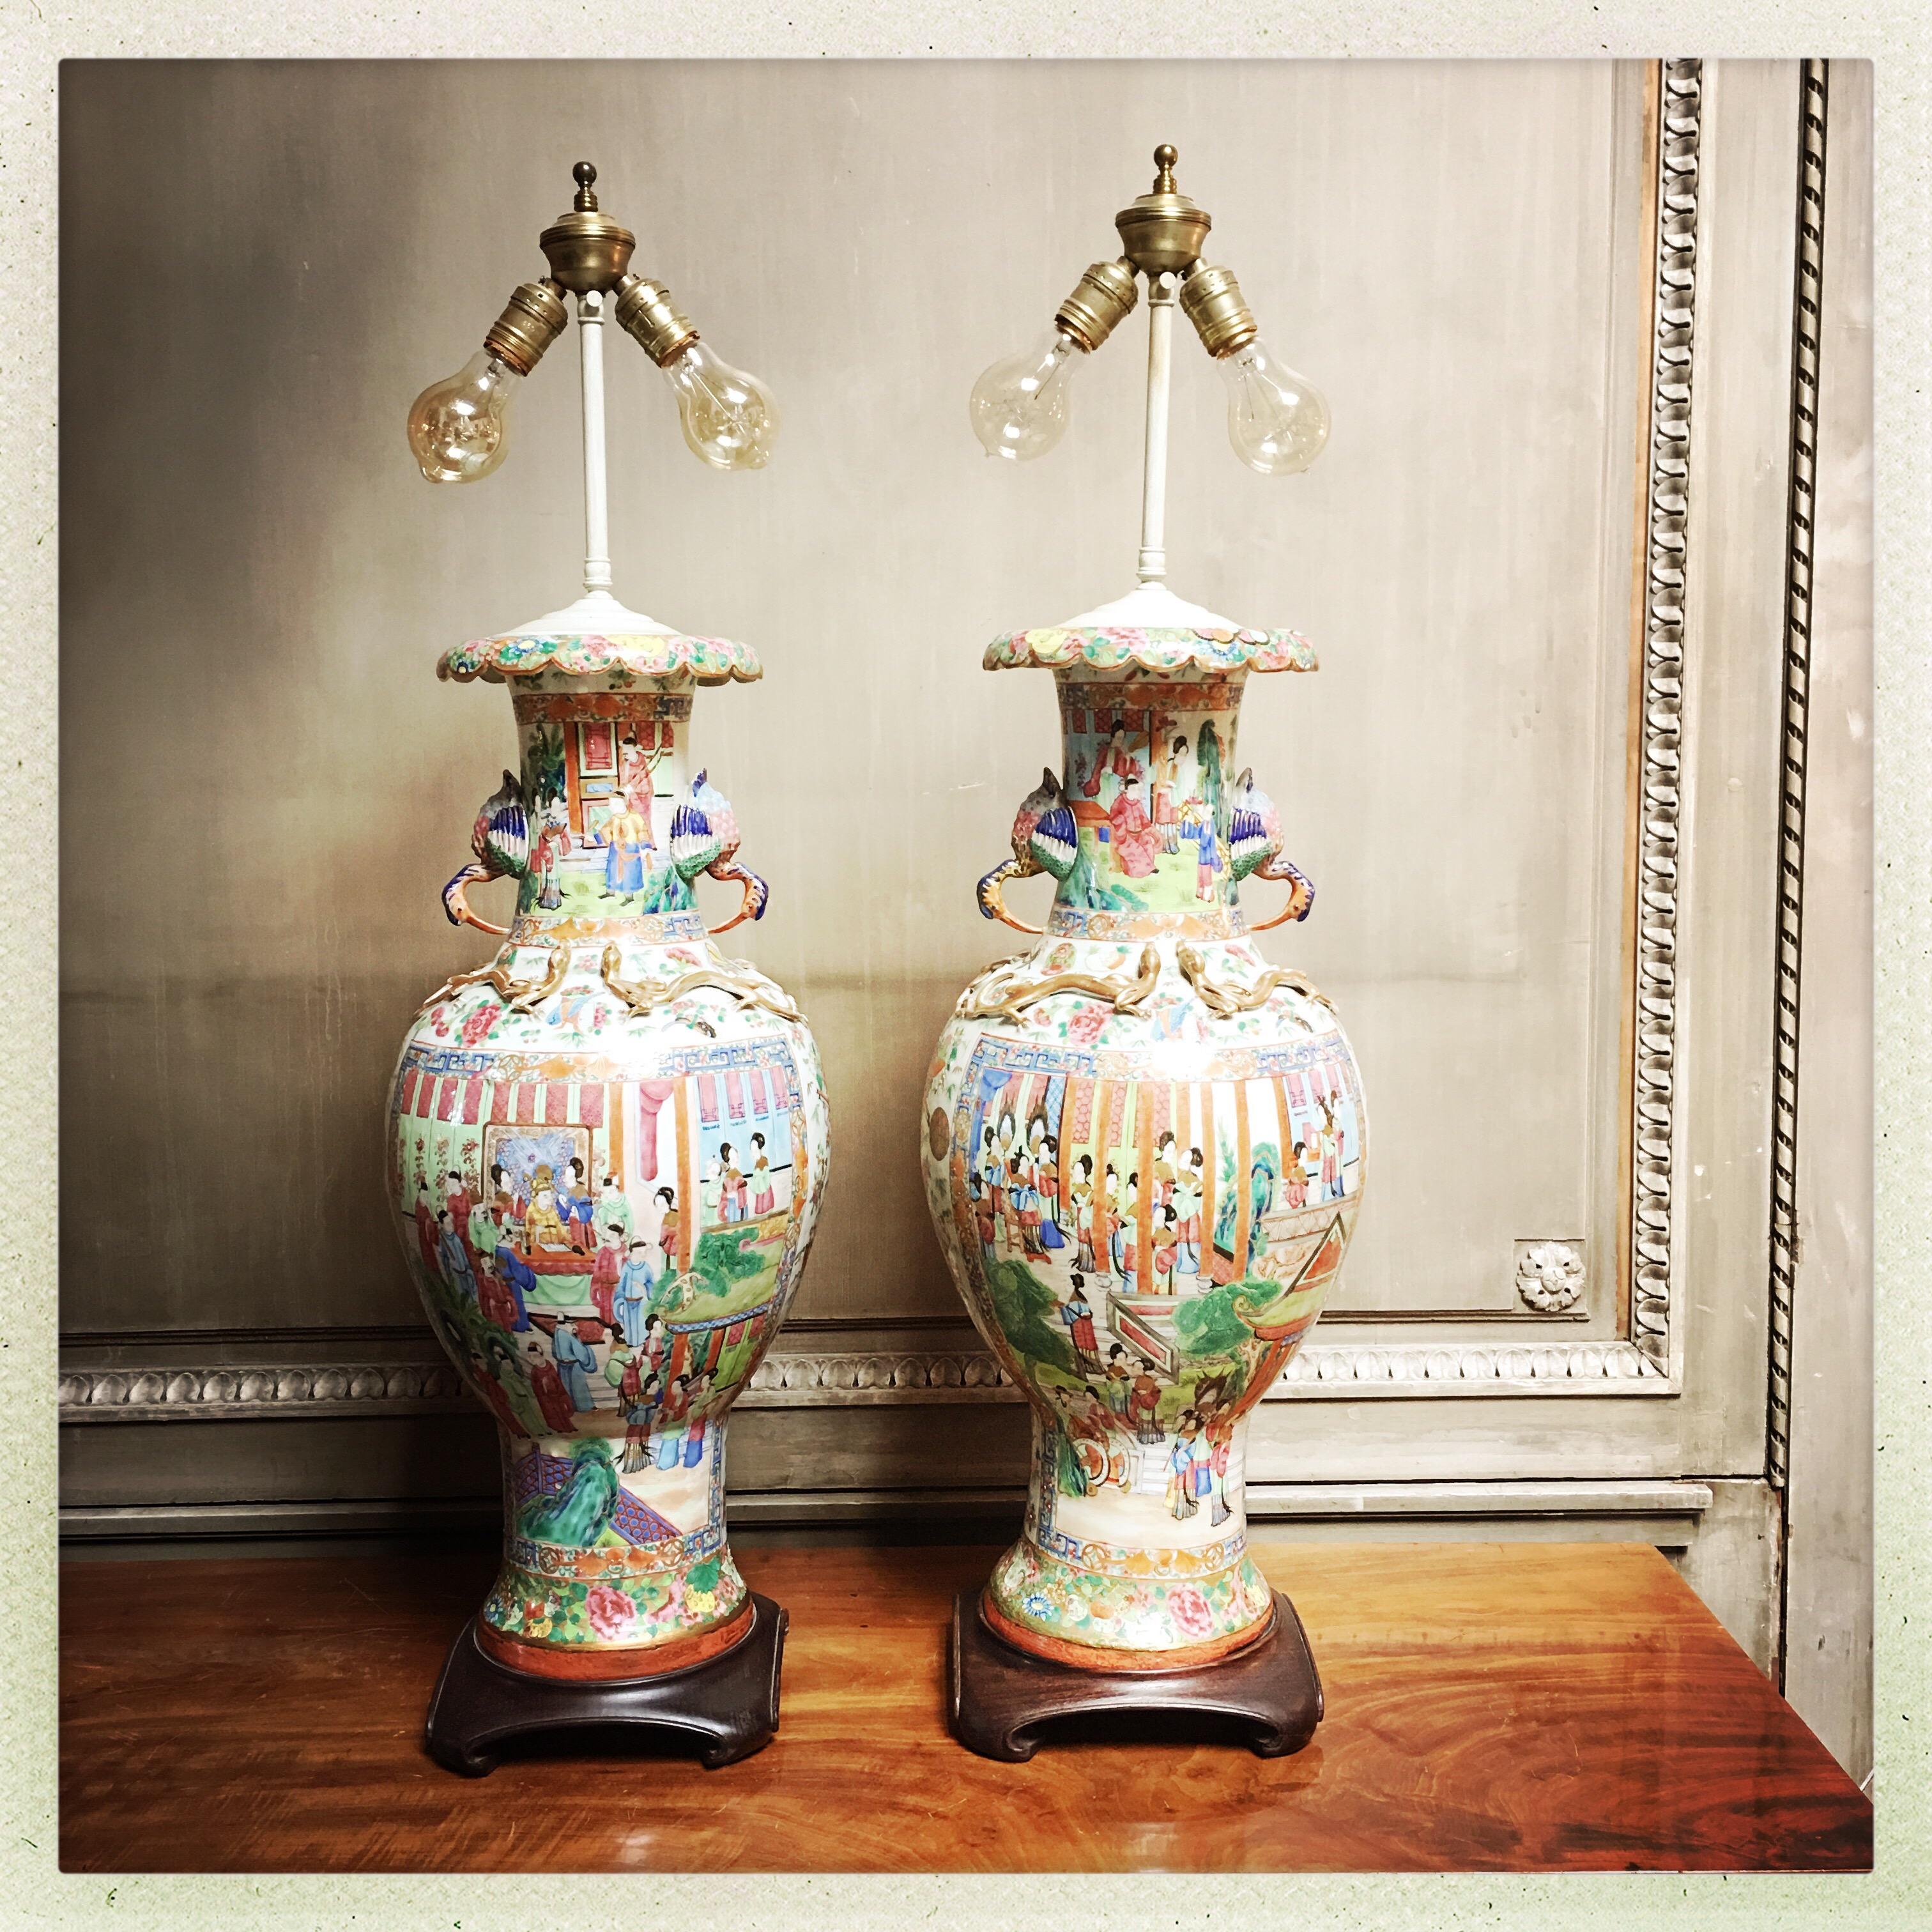 A very large pair of 19th century Chinese Canton export porcelain vases mounted as lamps. Restorations on bases of the porcelains and possibly elsewhere. Very good quality.